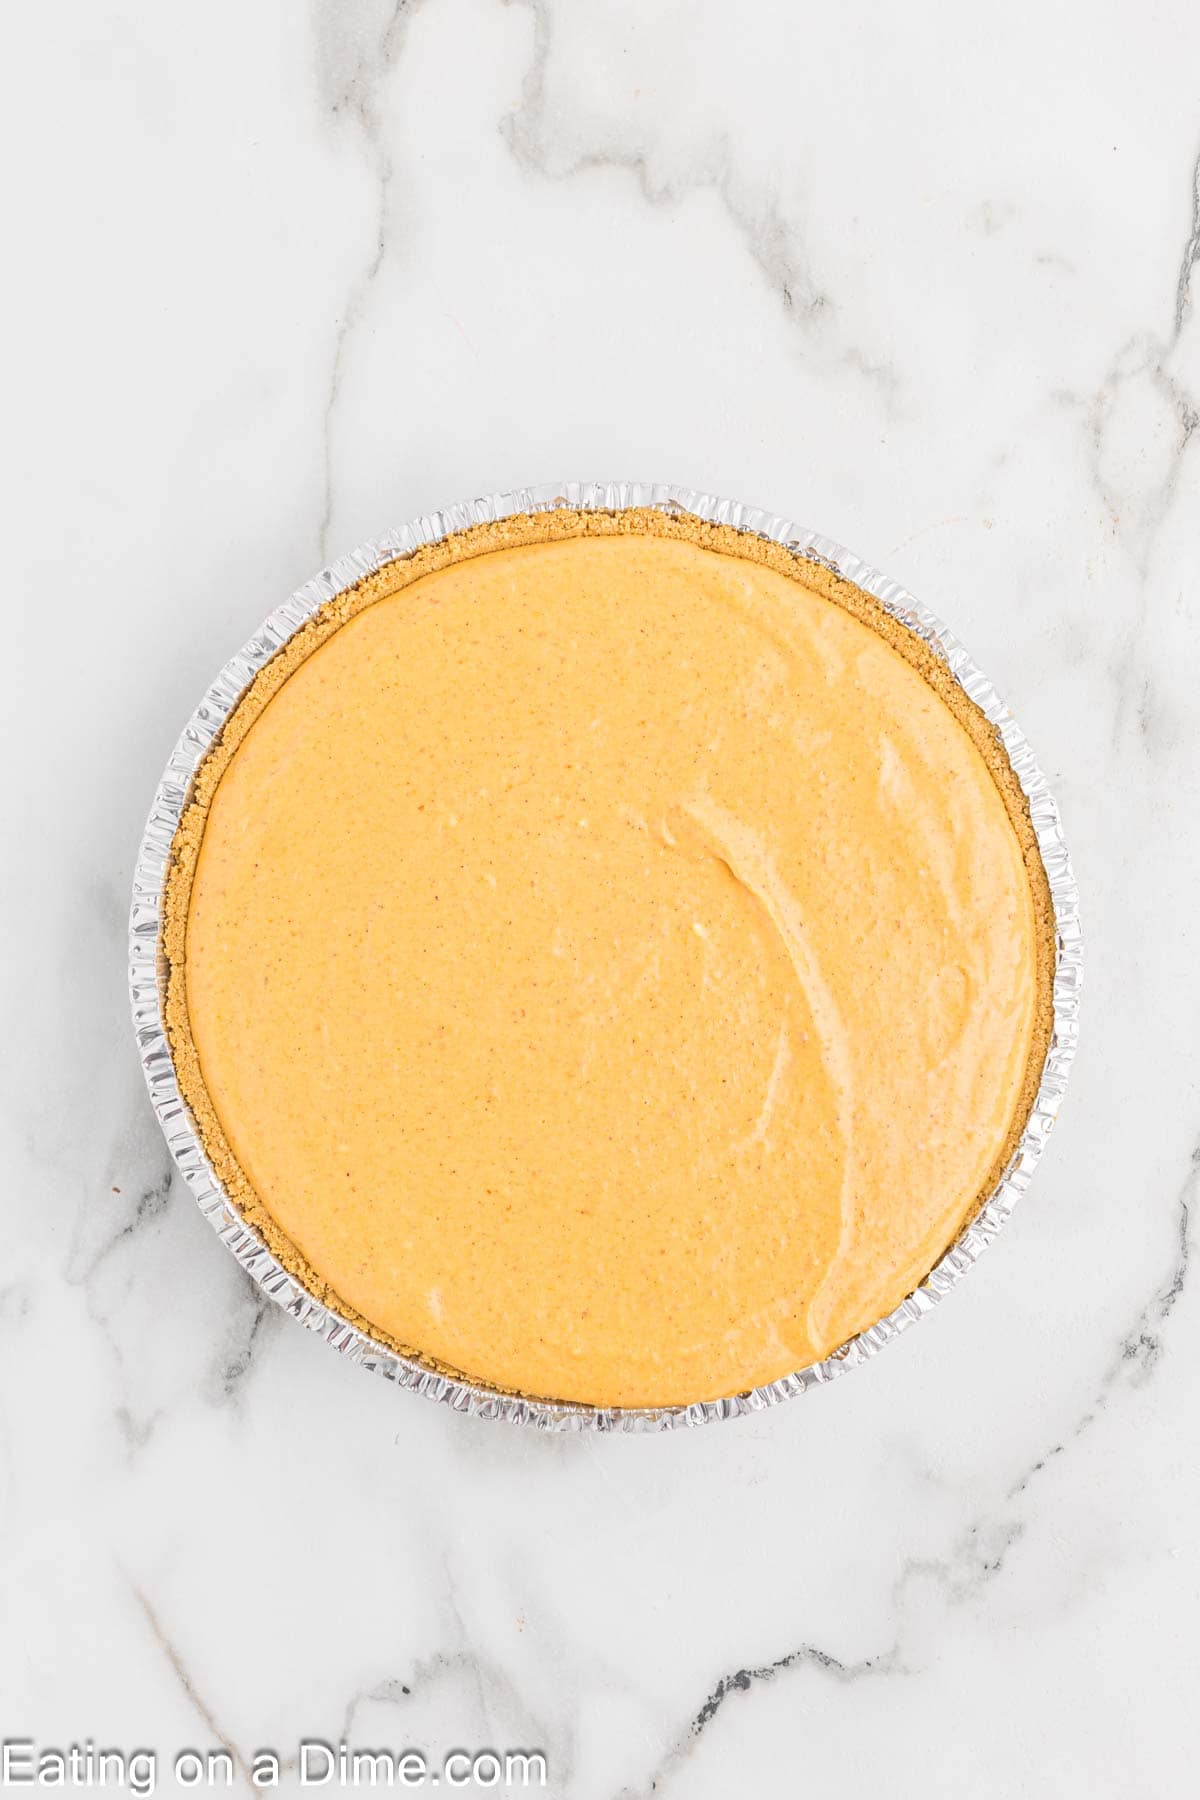 A round pumpkin pie in a silver foil pie tin sits on a white marble surface. The pie has a smooth, plain orange filling that hints at the creamy decadence of pumpkin cheesecake and features a thin, slightly visible crust.